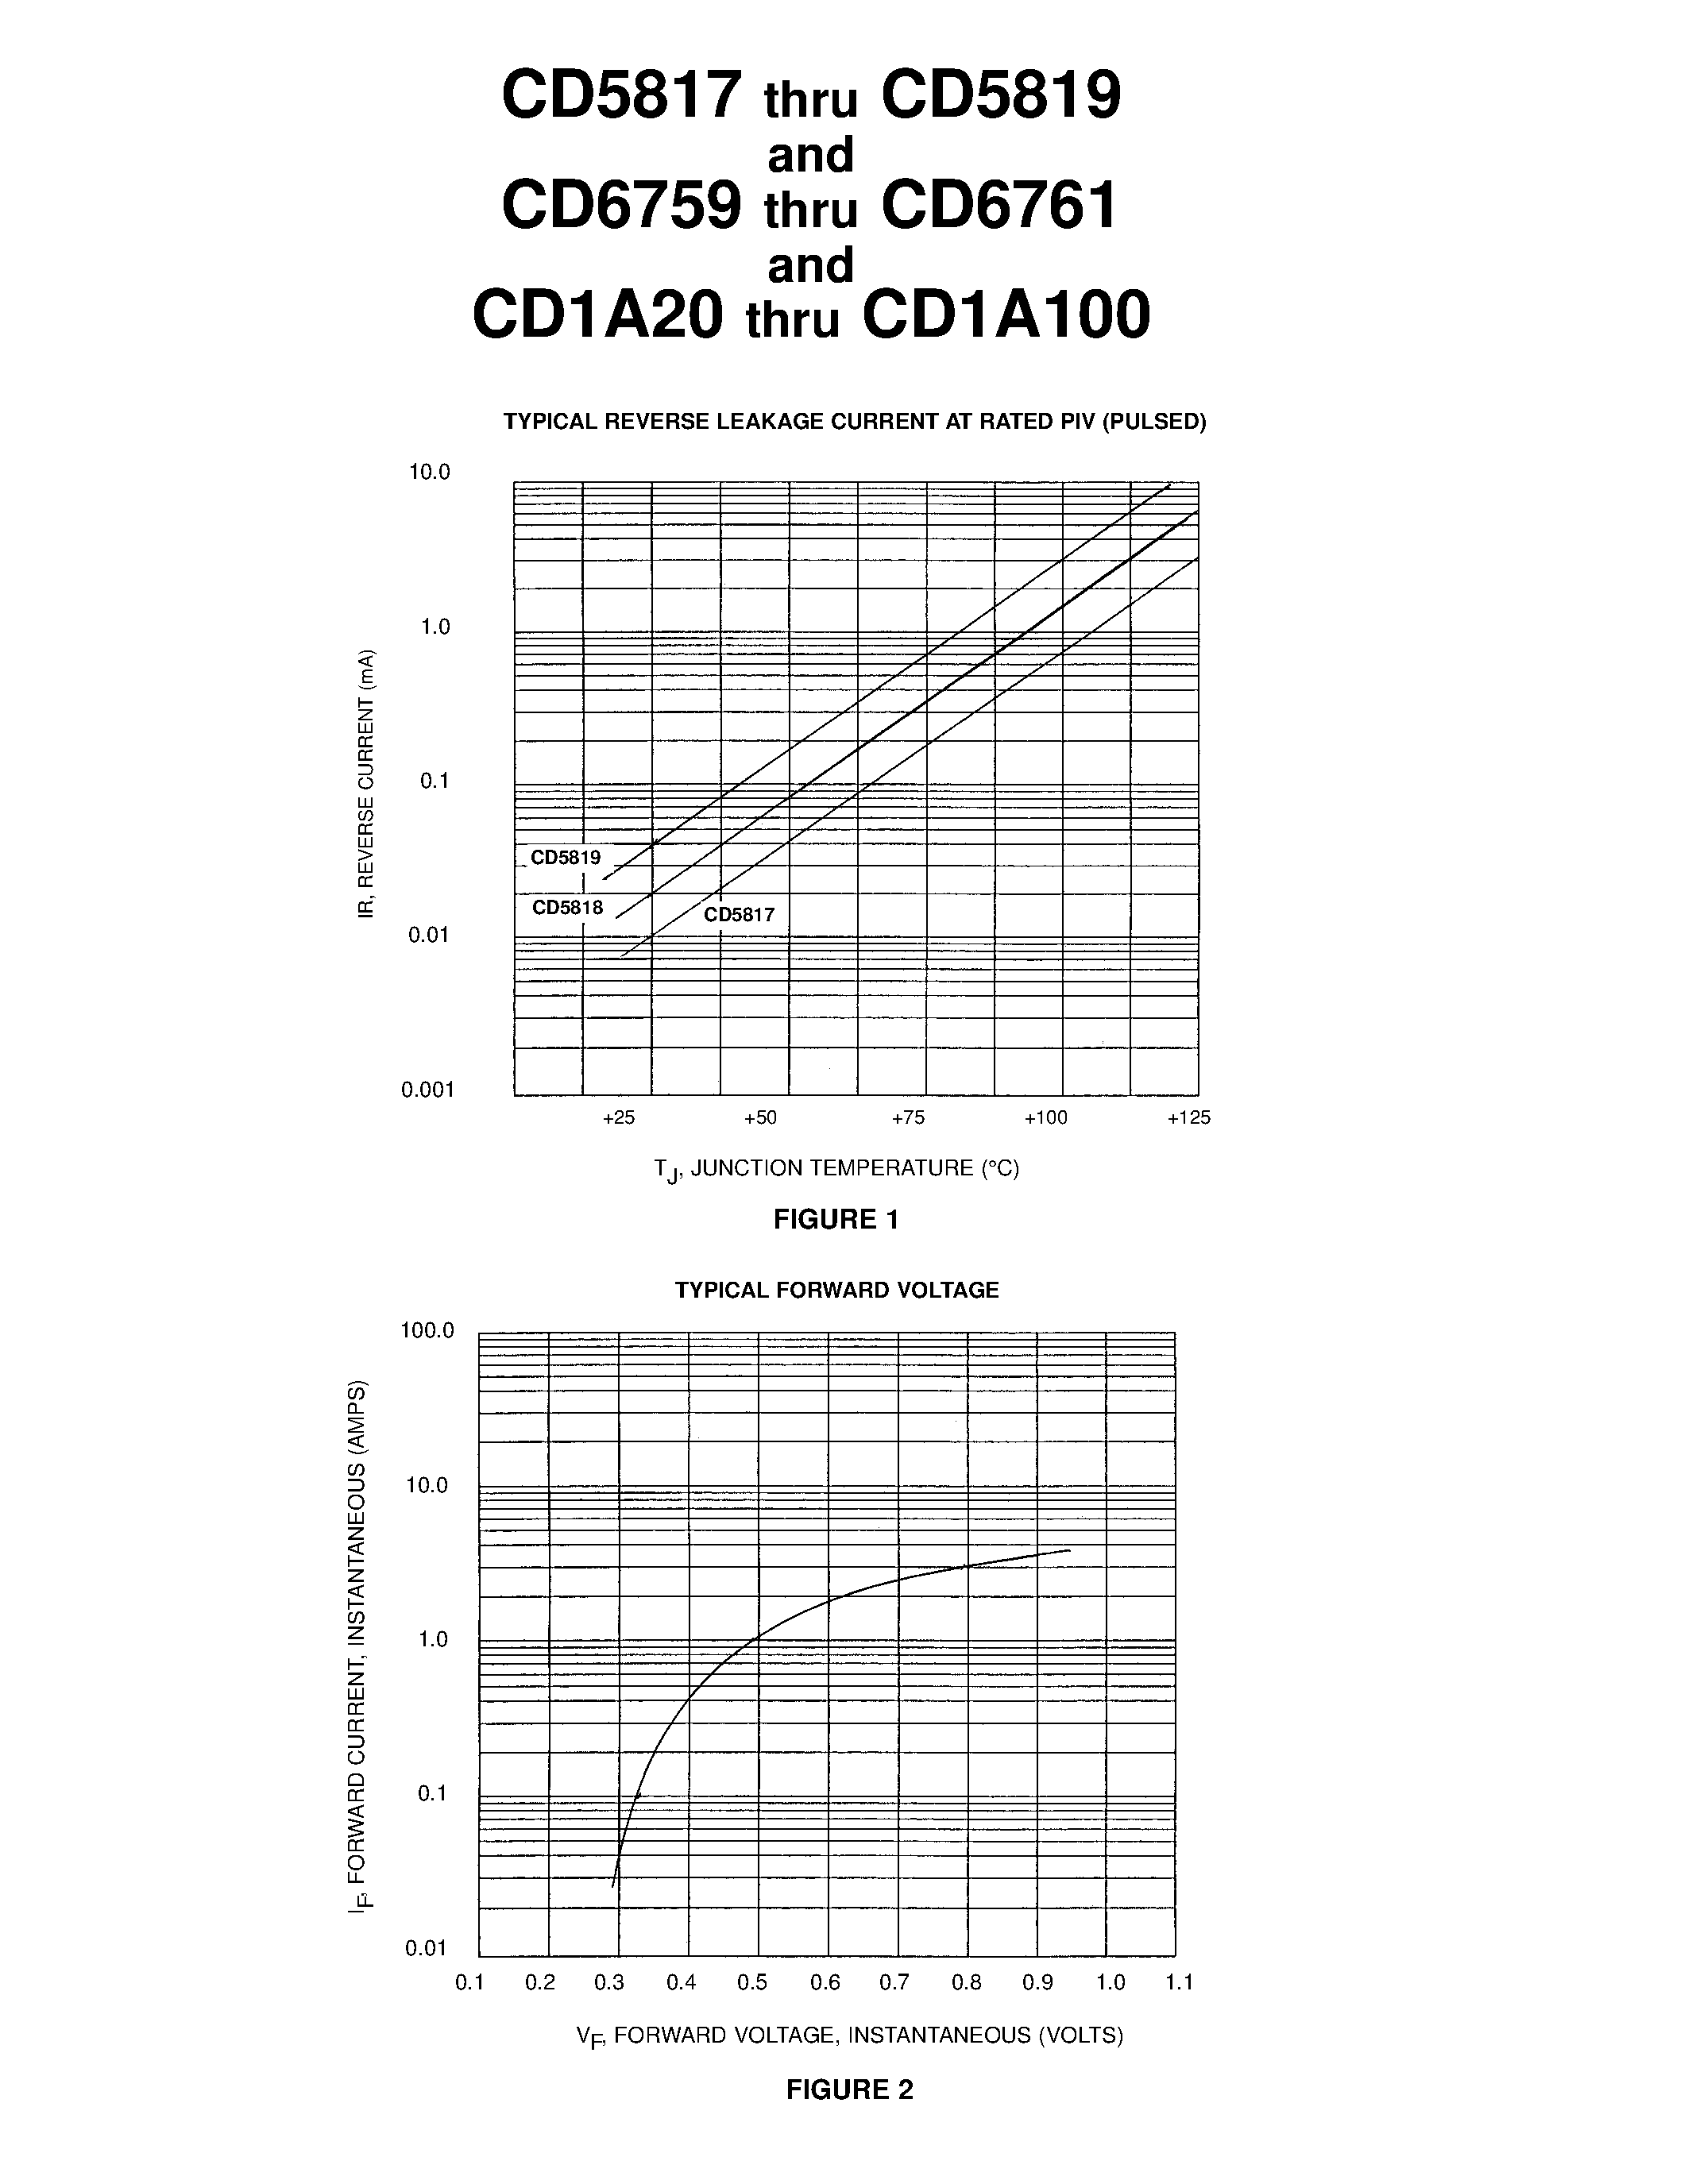 Datasheet CD1A80 - 1 AMP SCHOTTKY BARRIER RECTIFIER CHIPS page 2